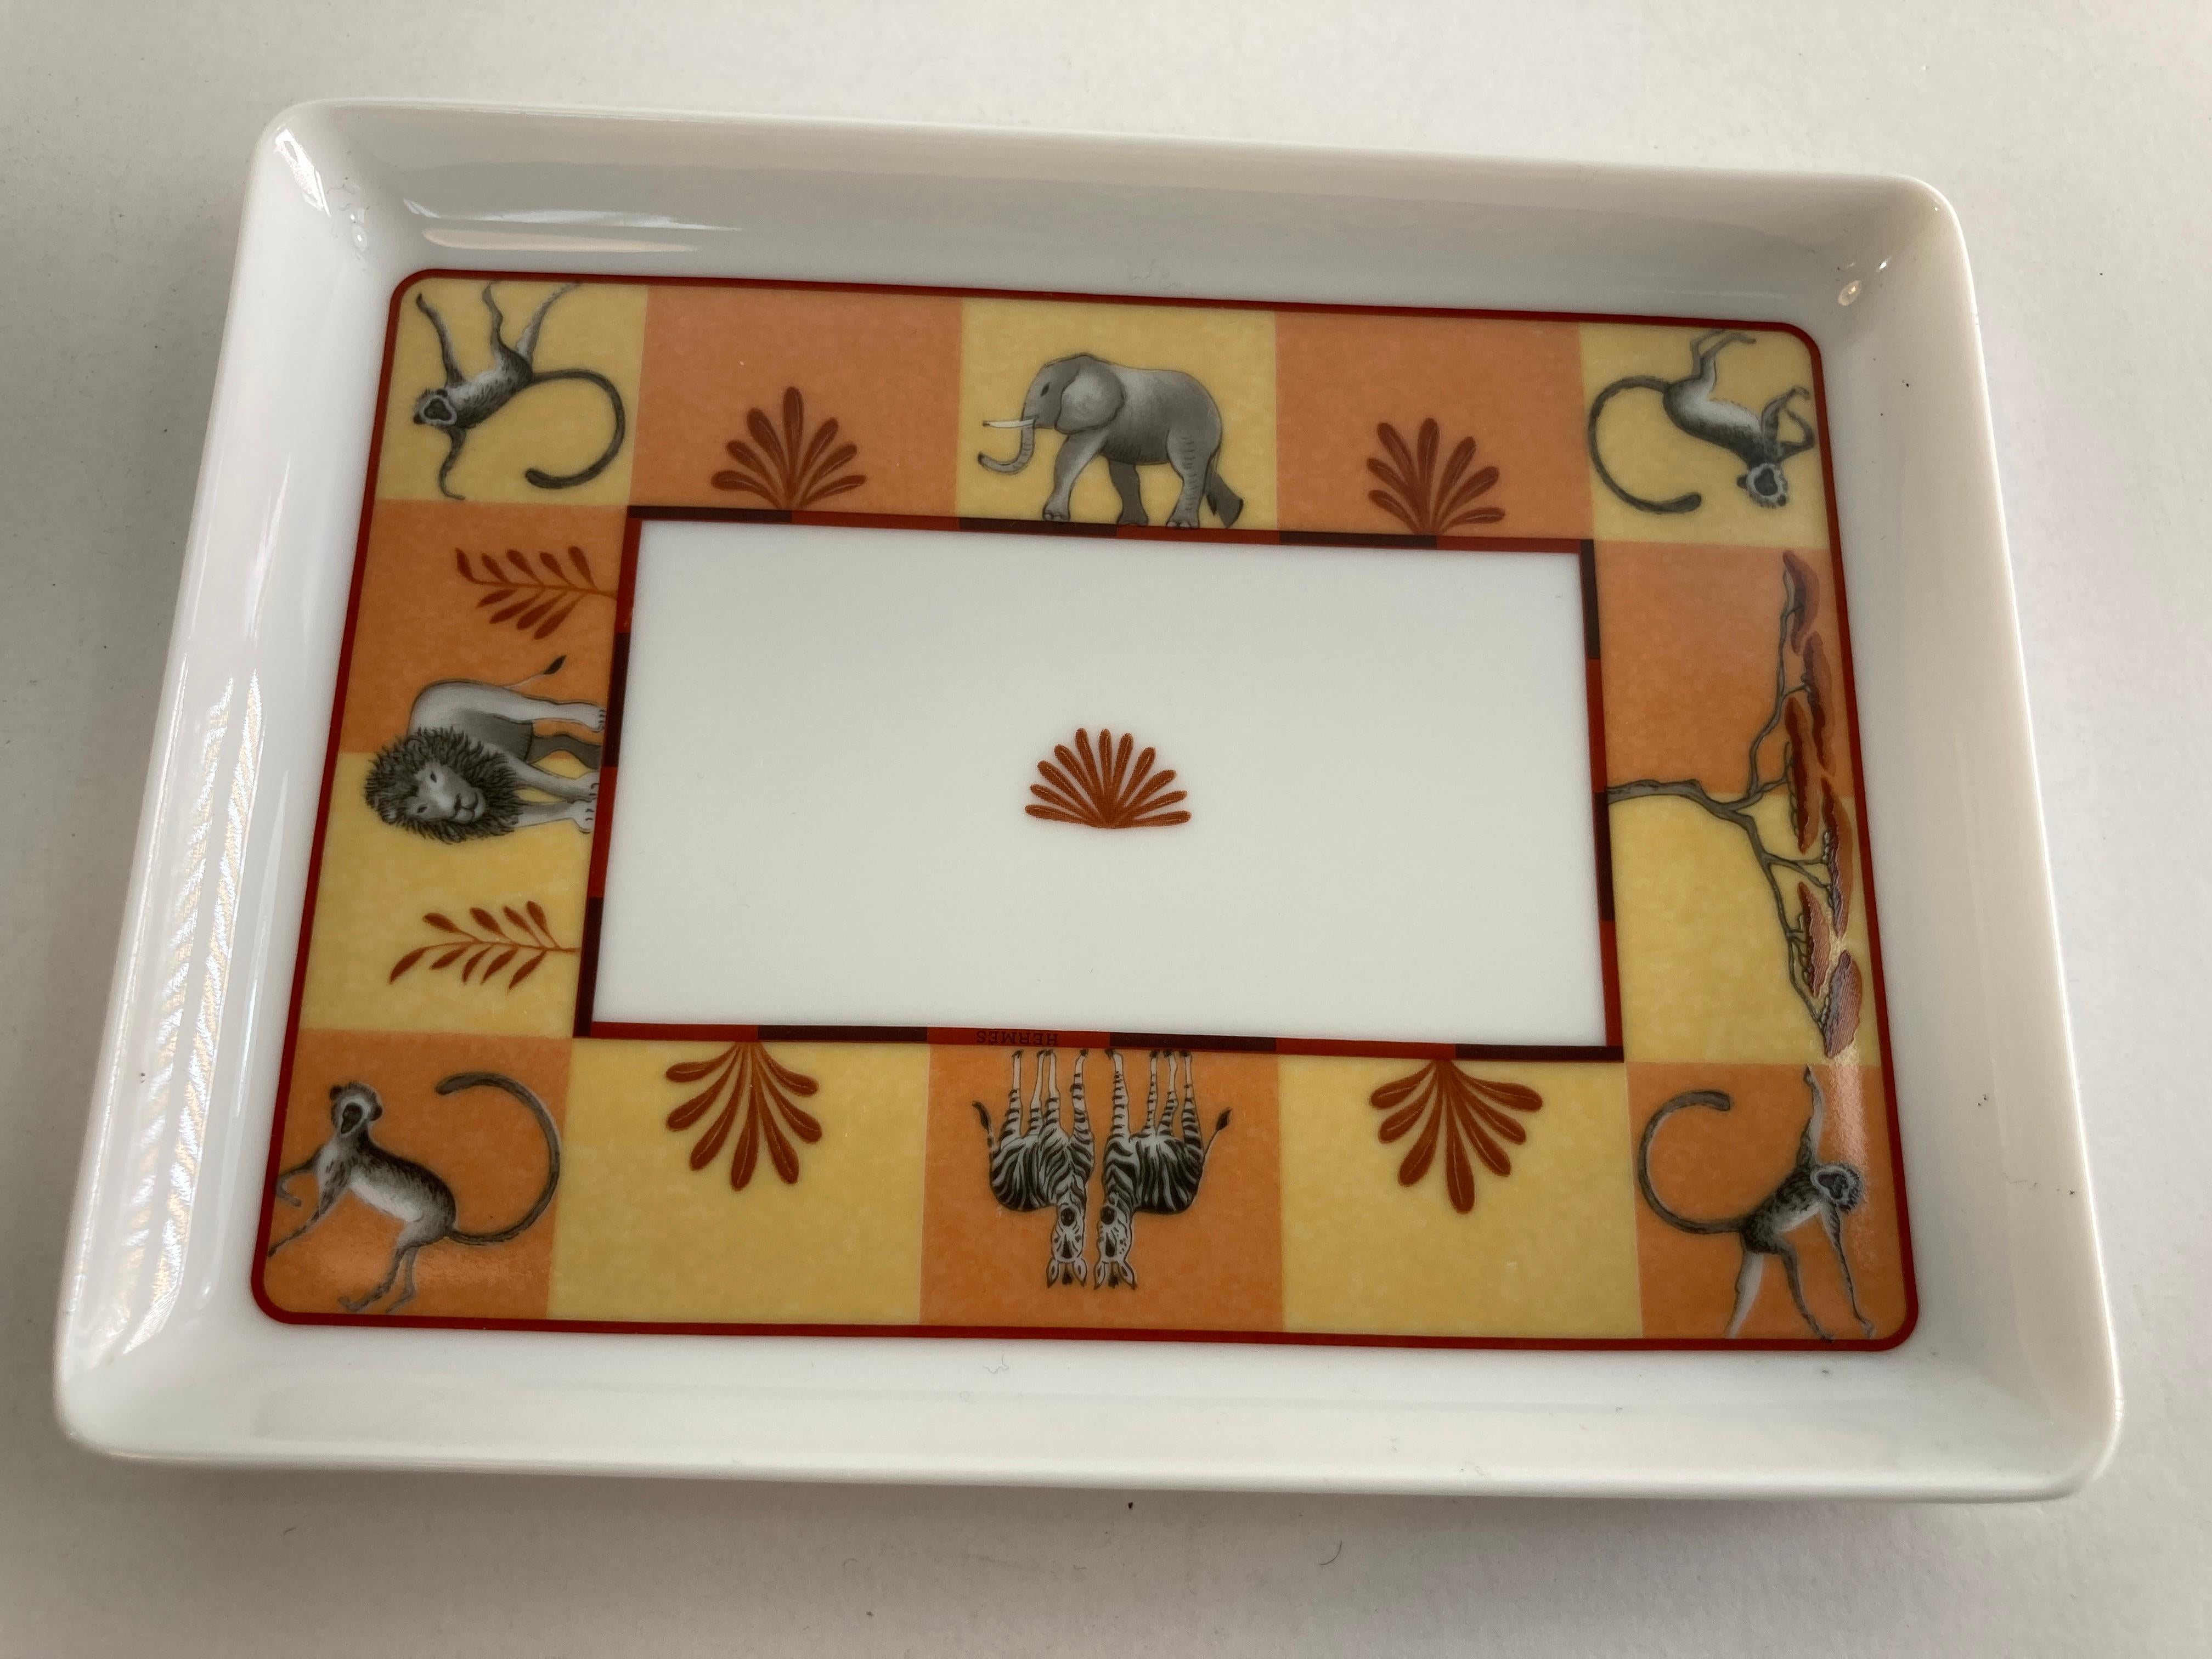 Hermès porcelain Africa orange small catchall trinket tray with Safari animals design.
Rare Vintage Hermes Porcelain Trinket Dish, Change Tray in the original box From late 1990's in the Africa pattern by Hermes.
This lovely vide poche features